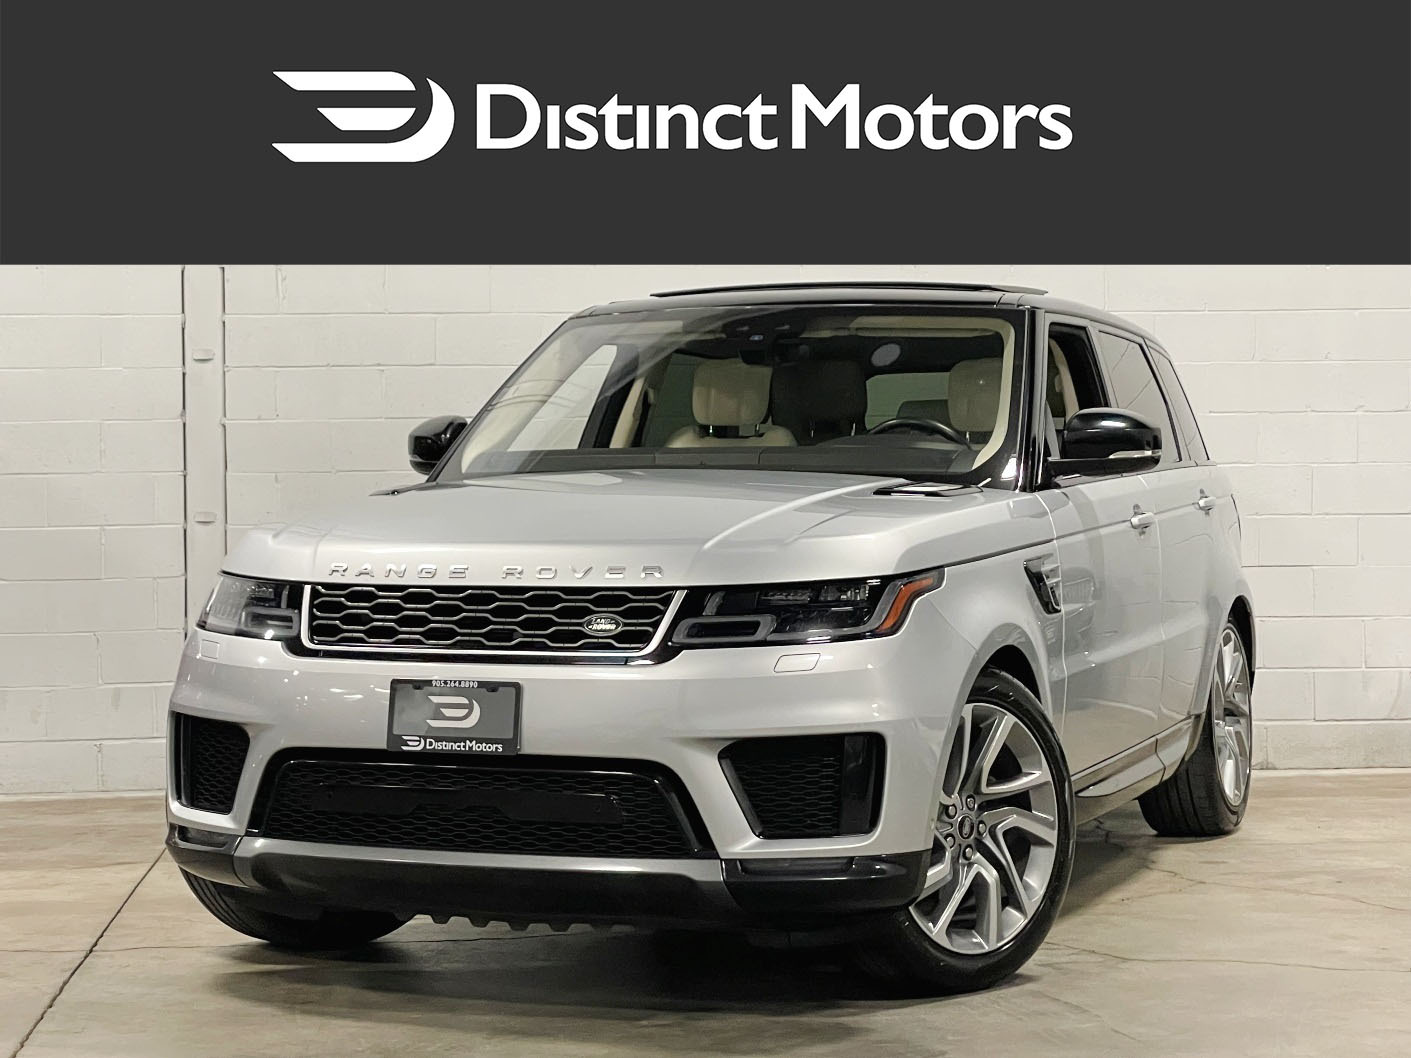 2019 Land Rover Range Rover Sport Td6 Diesel HSE,ADAPTIVE CRUISE,21'' ALLOYS,LOADED